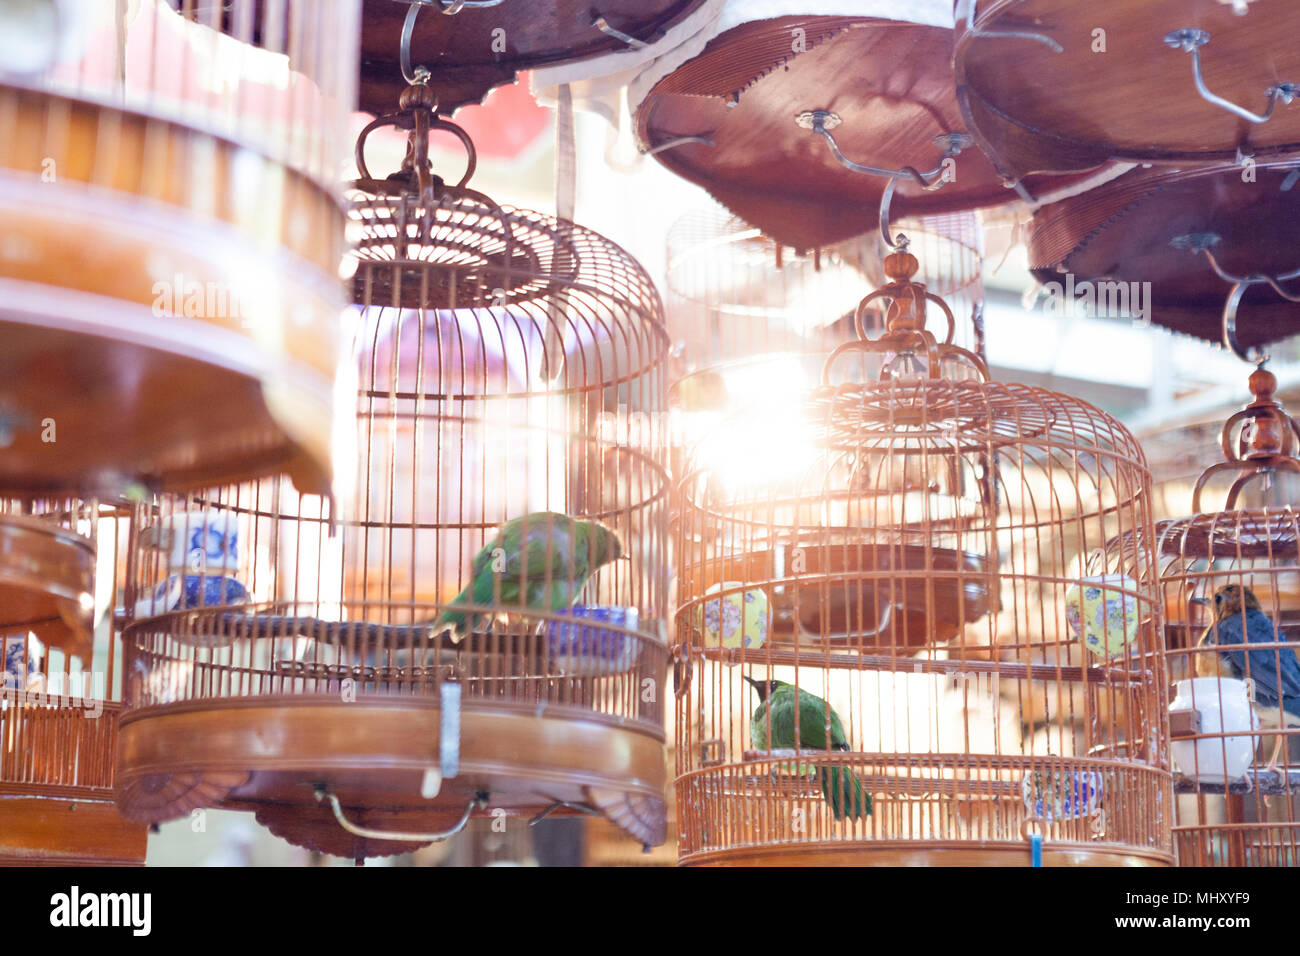 Birds in copper birdcages, Hong Kong, China, East Asia Stock Photo